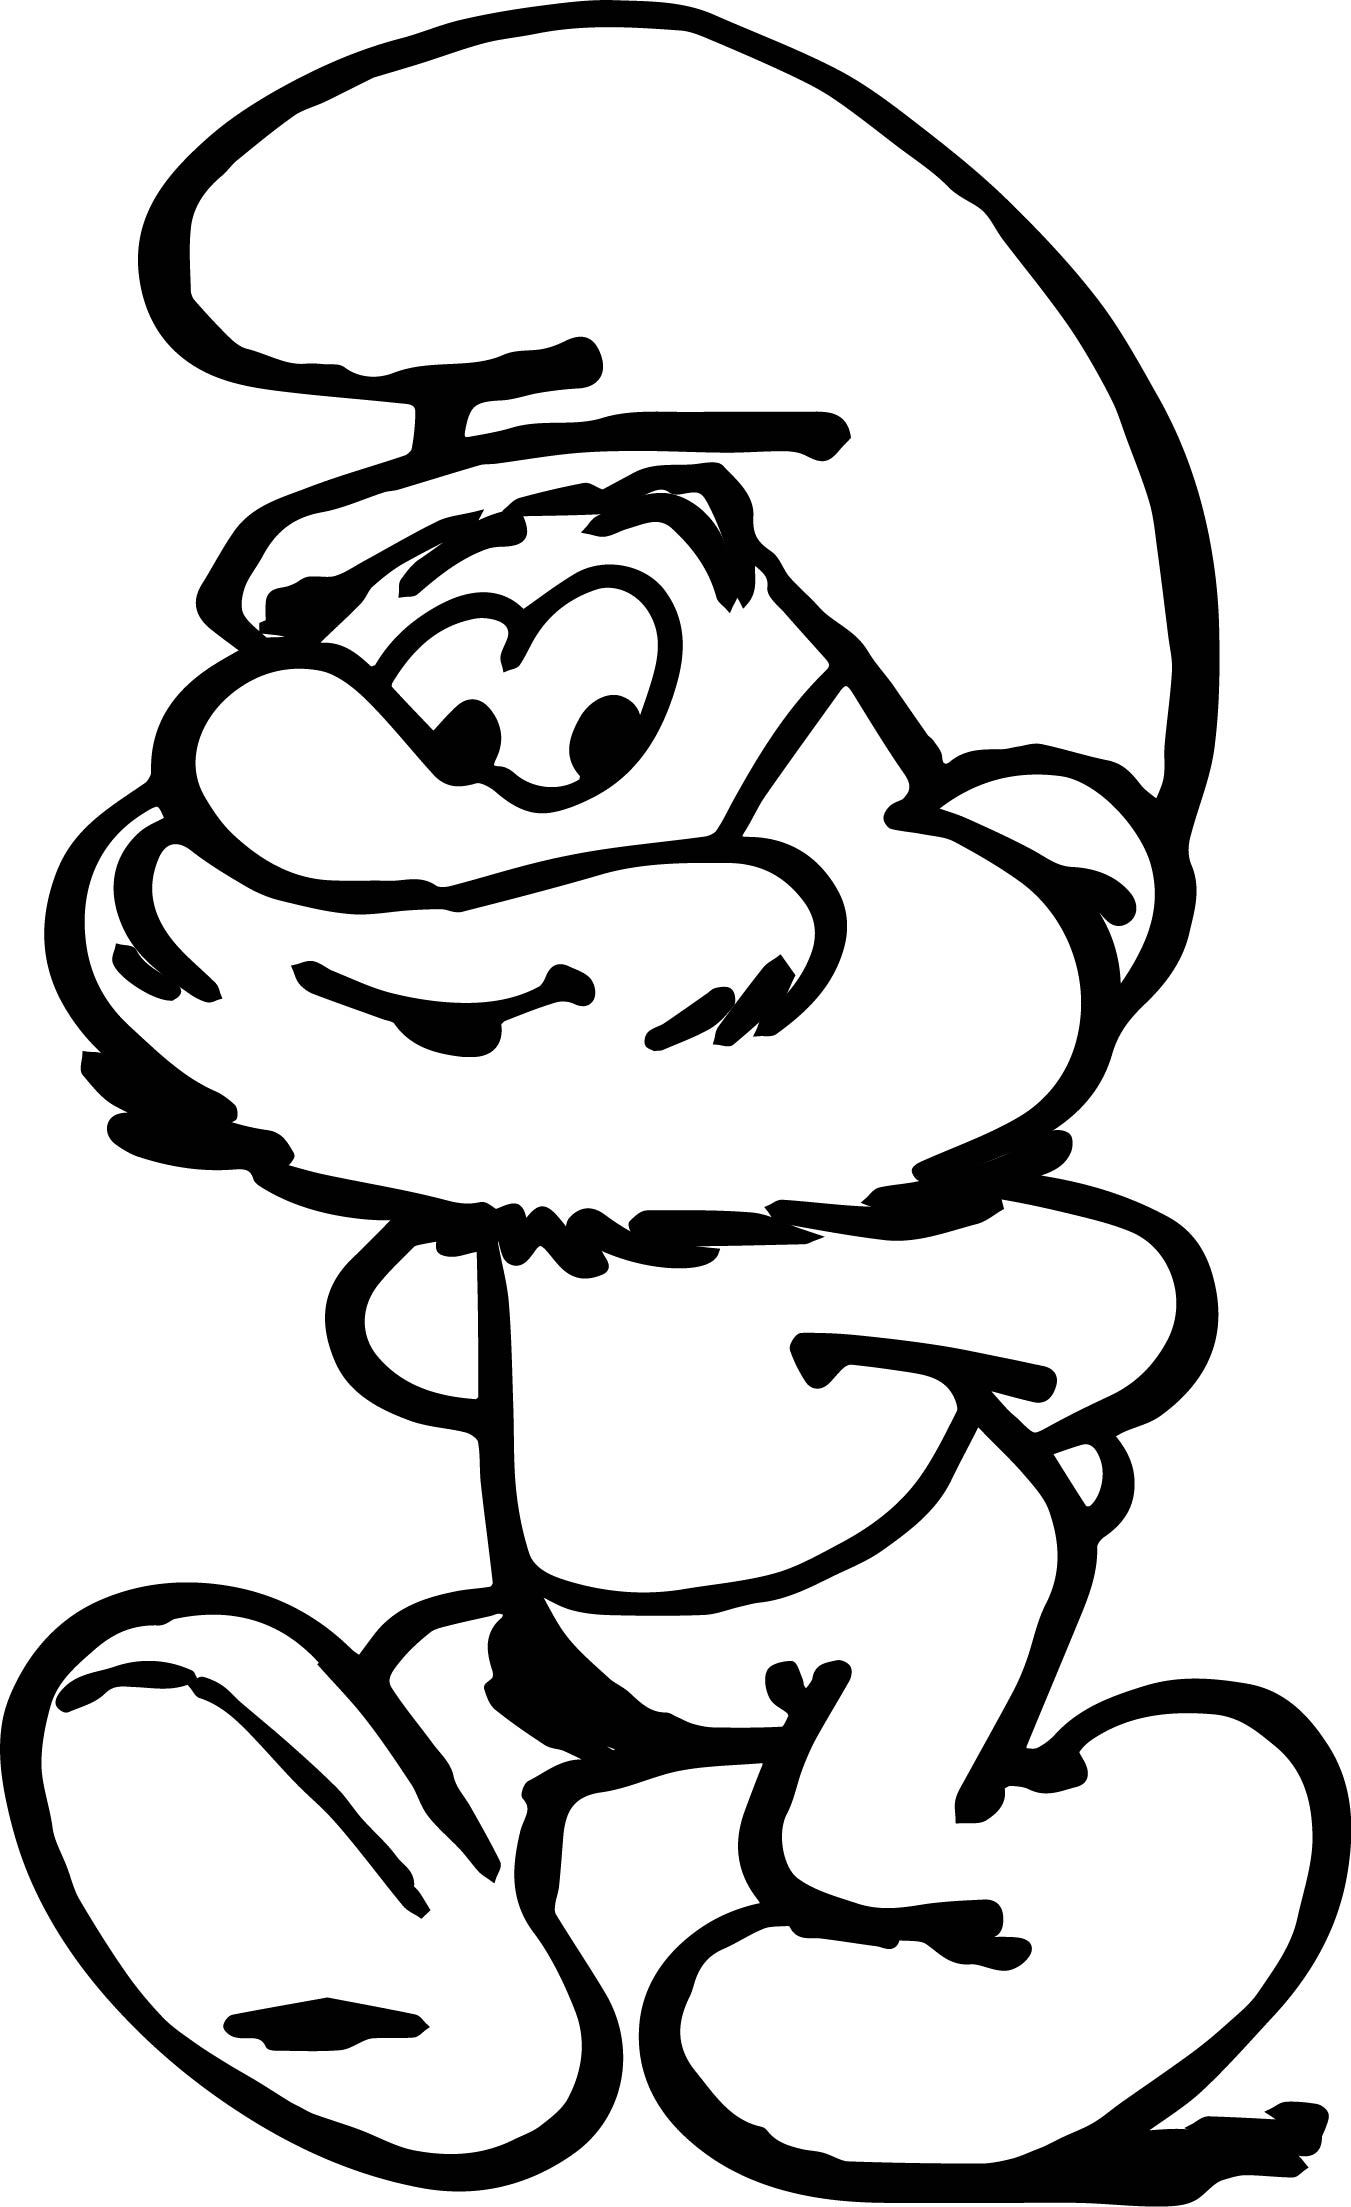 1351x2207 Papa Smurf Coloring Page Coloring Page For Kids.